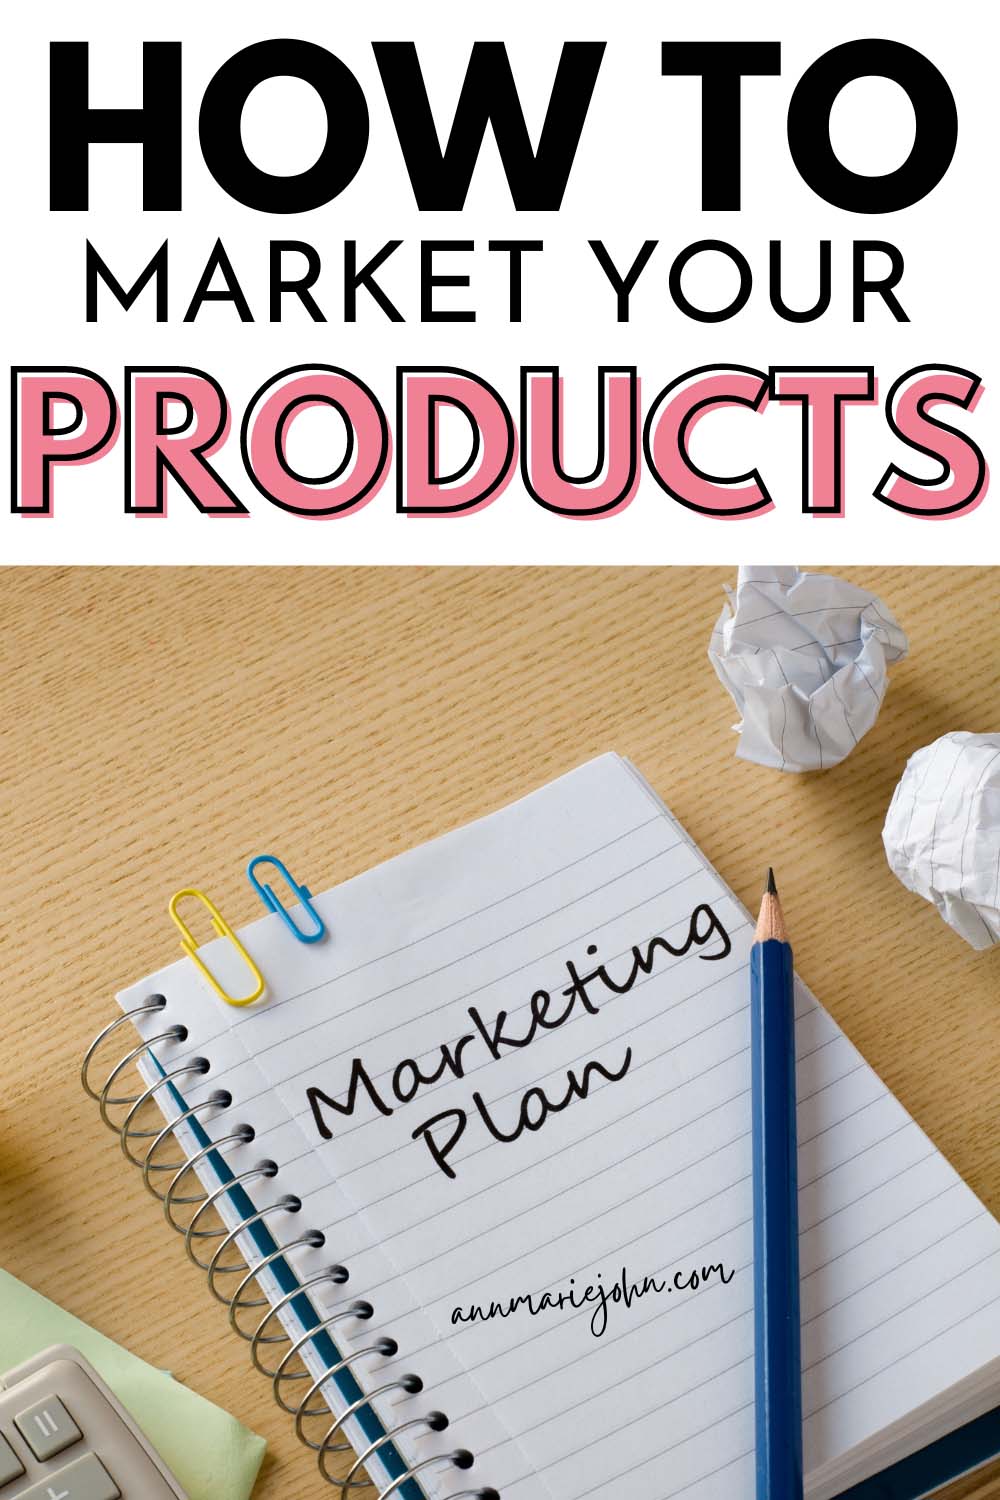 How to Market Your Products